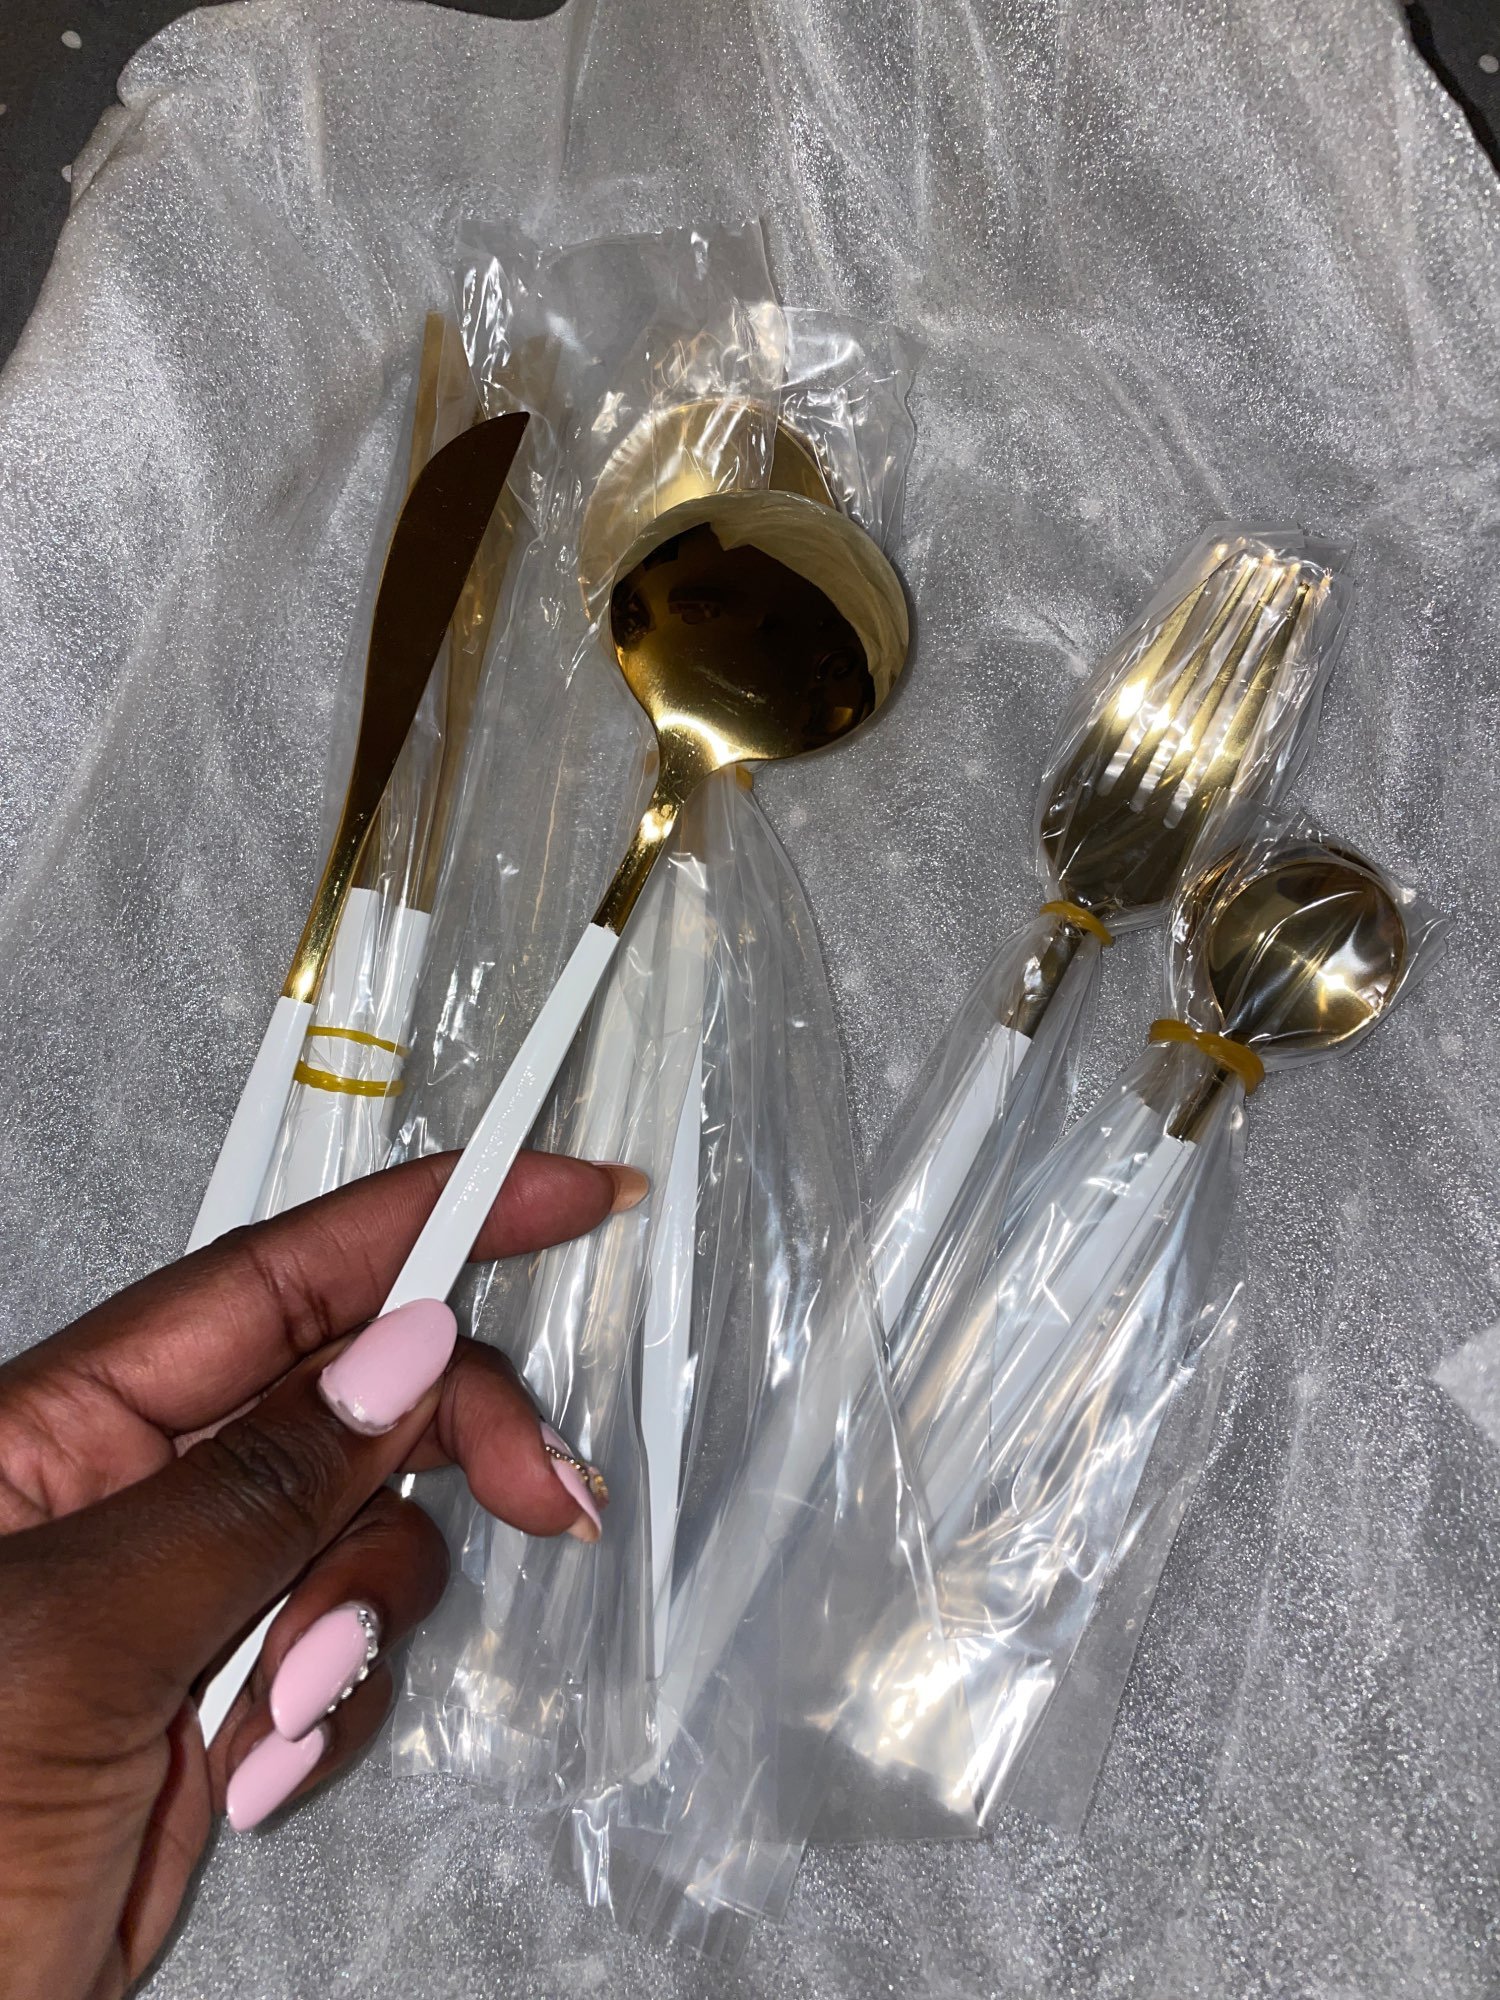 Stainless Steel Flatware Set photo review